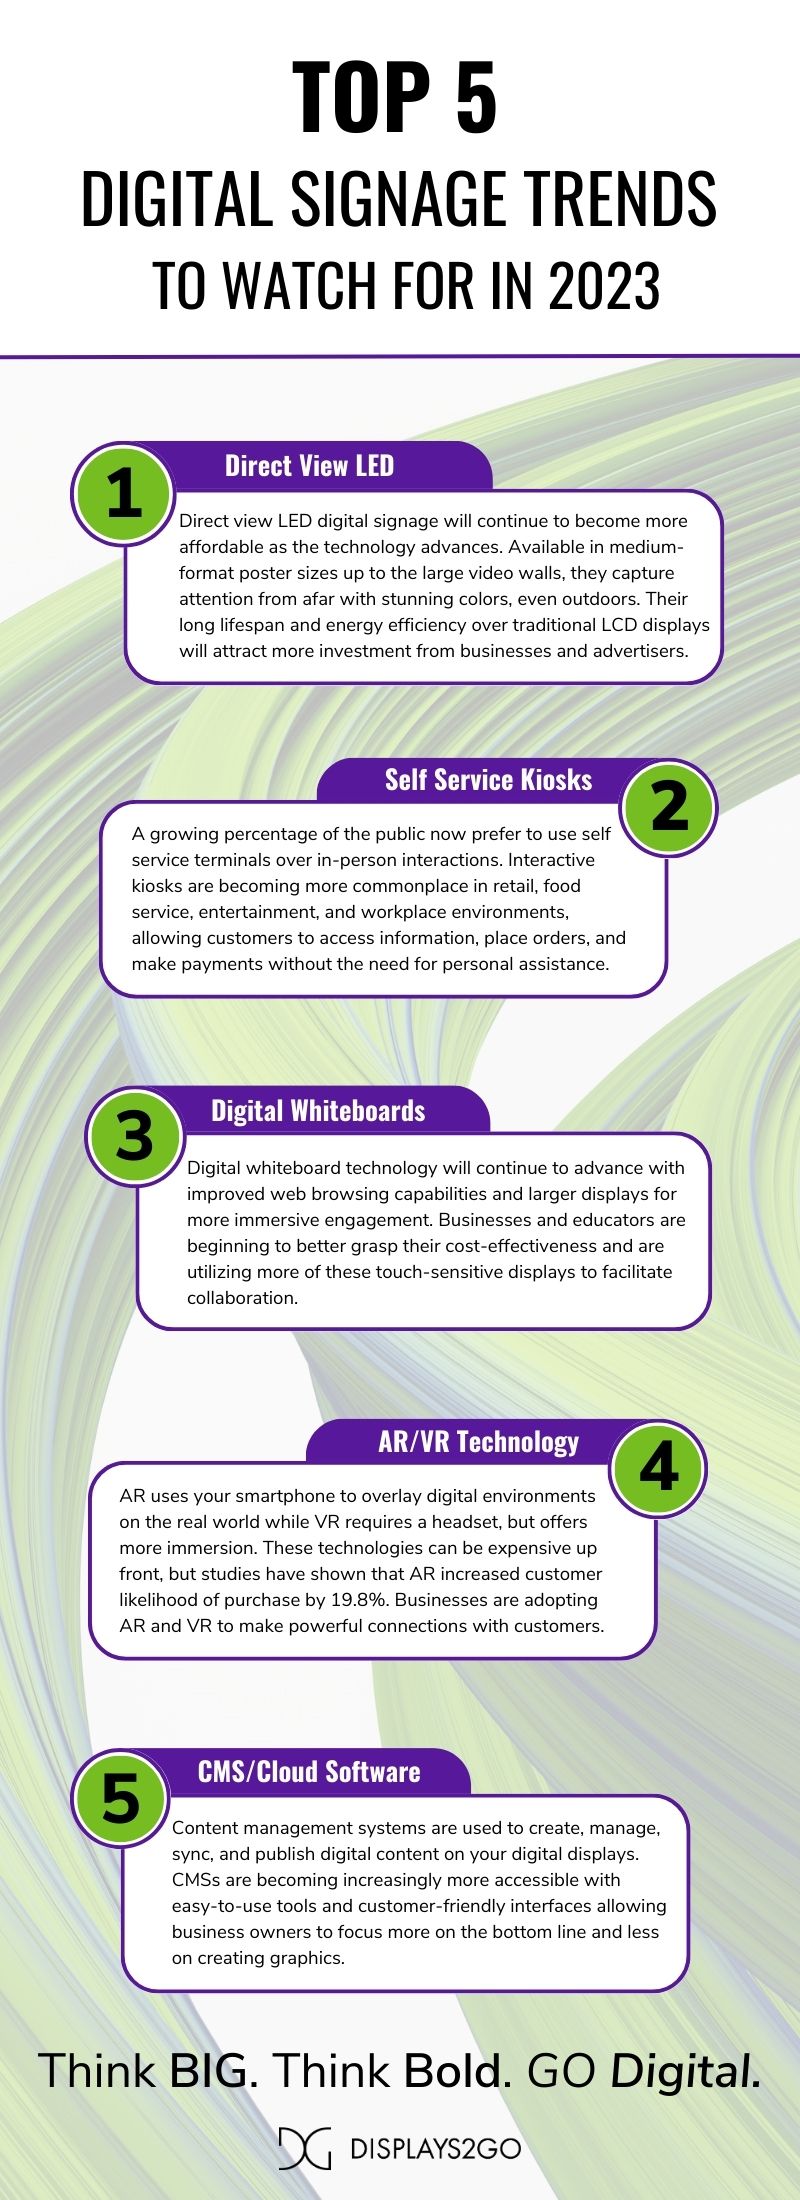 Digital signage trends for 2023 infographic